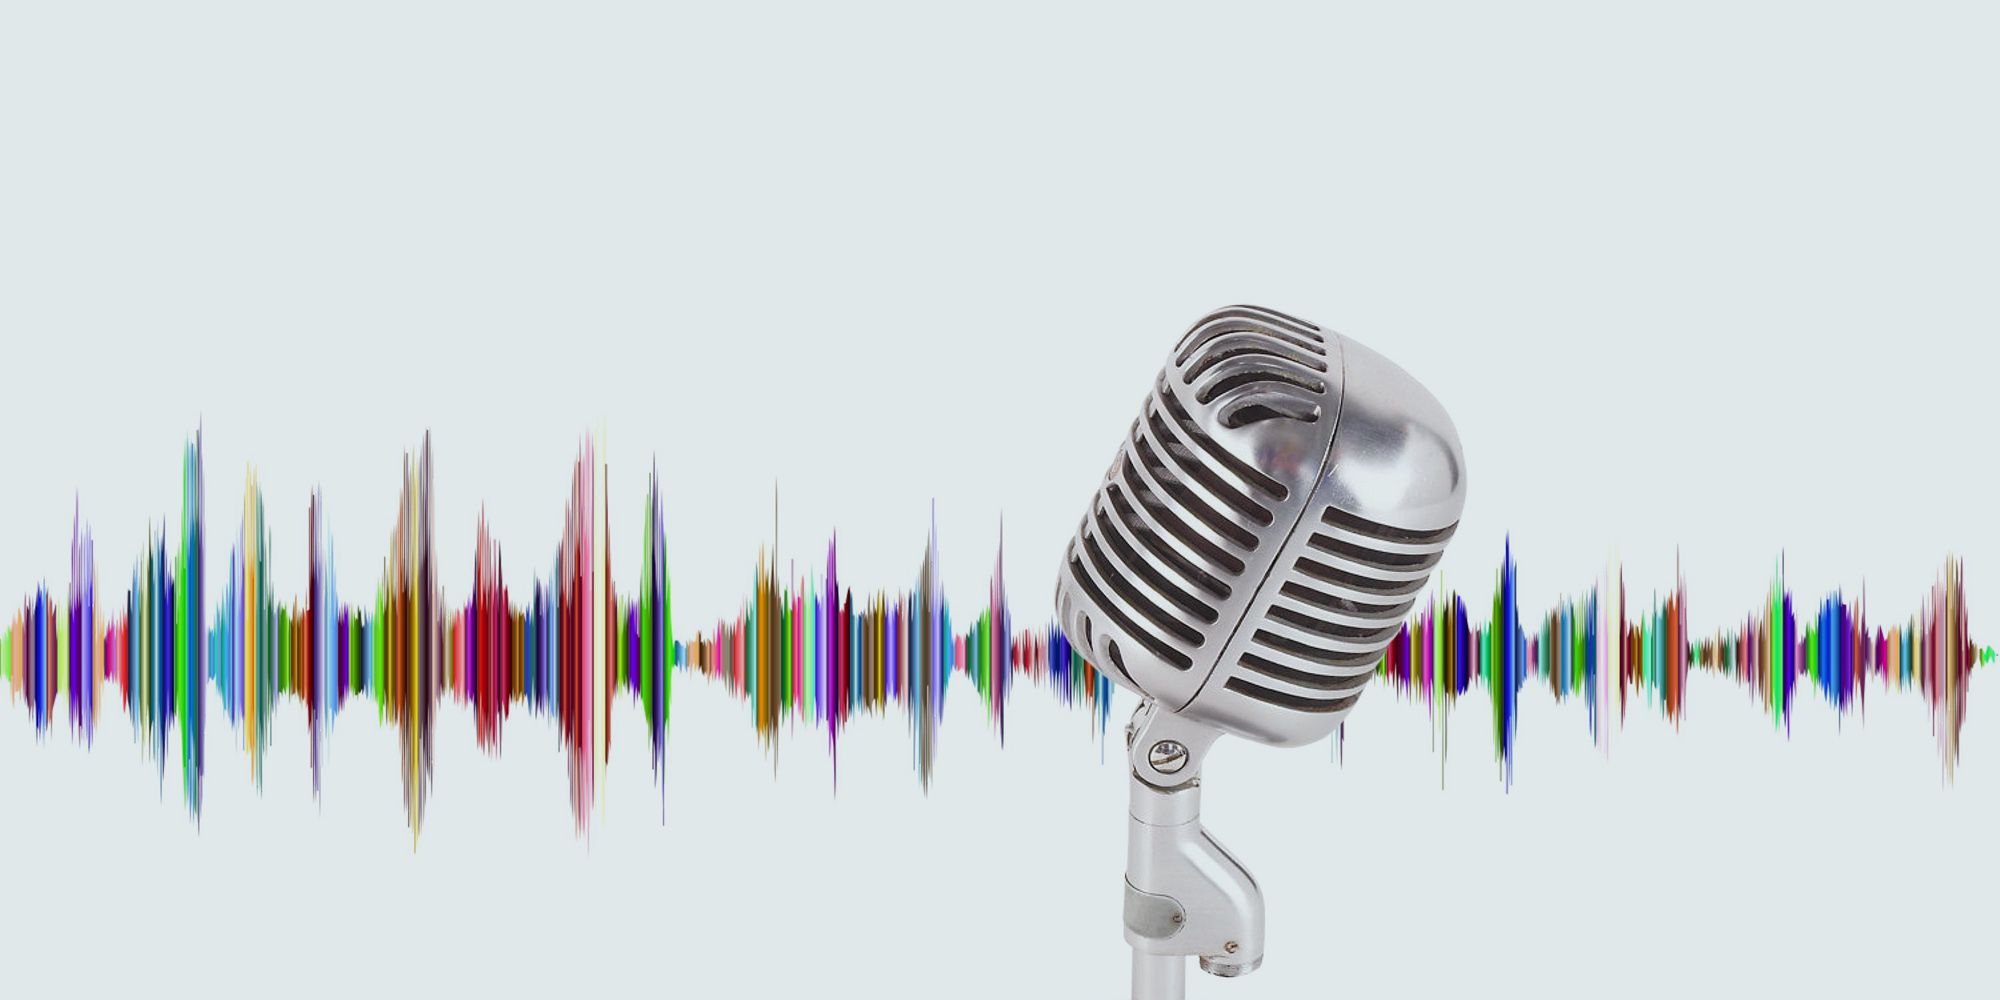 Killing it in your next podcast or radio interview